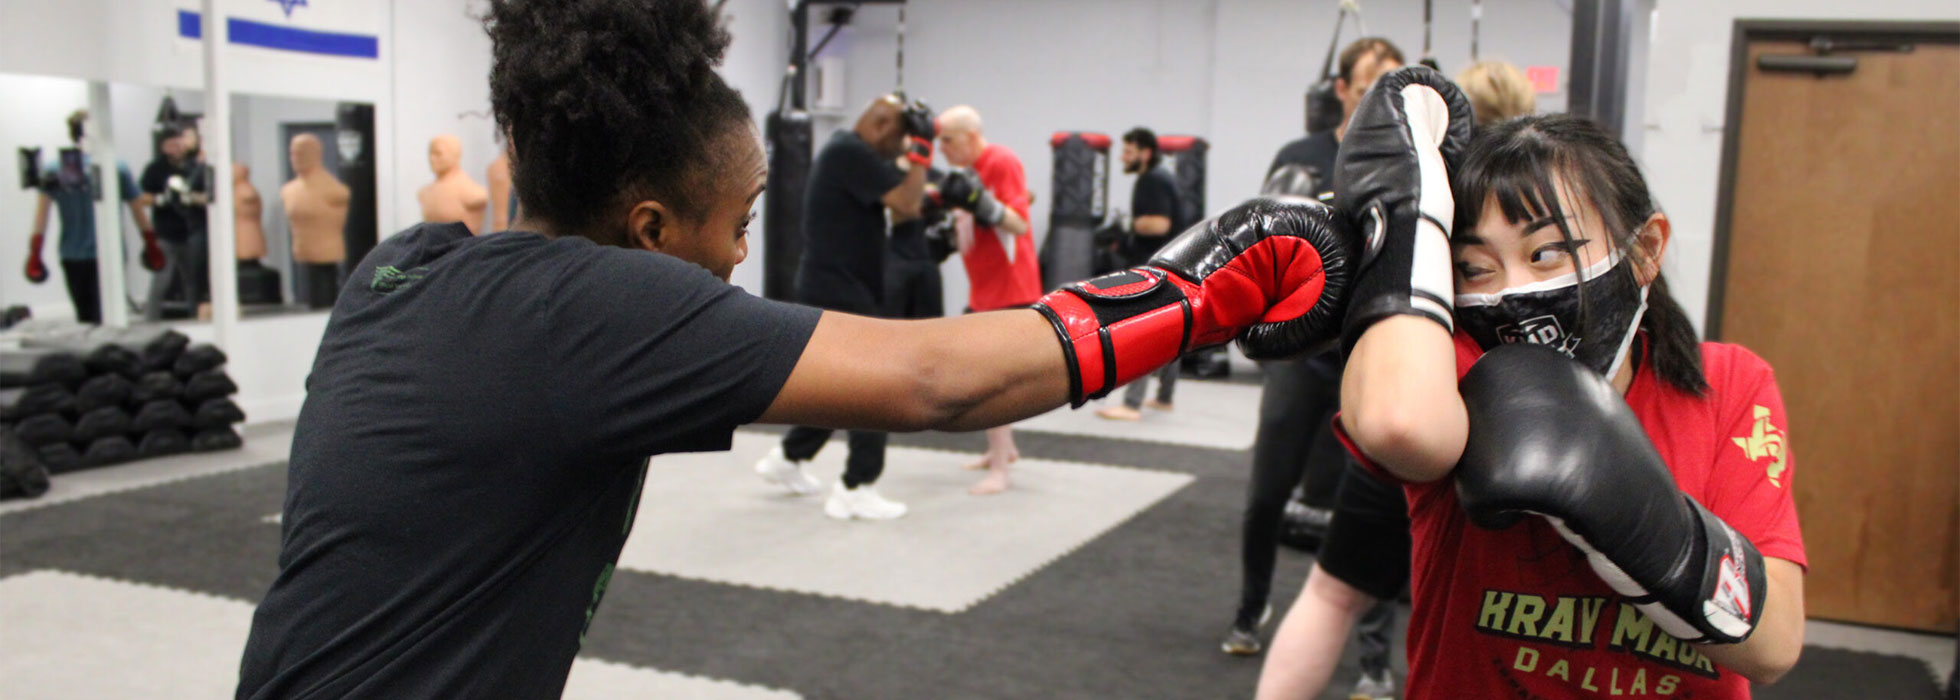 Why Krav Maga Dallas Is Ranked One of the Best Martial Arts Schools Near Plano, TX